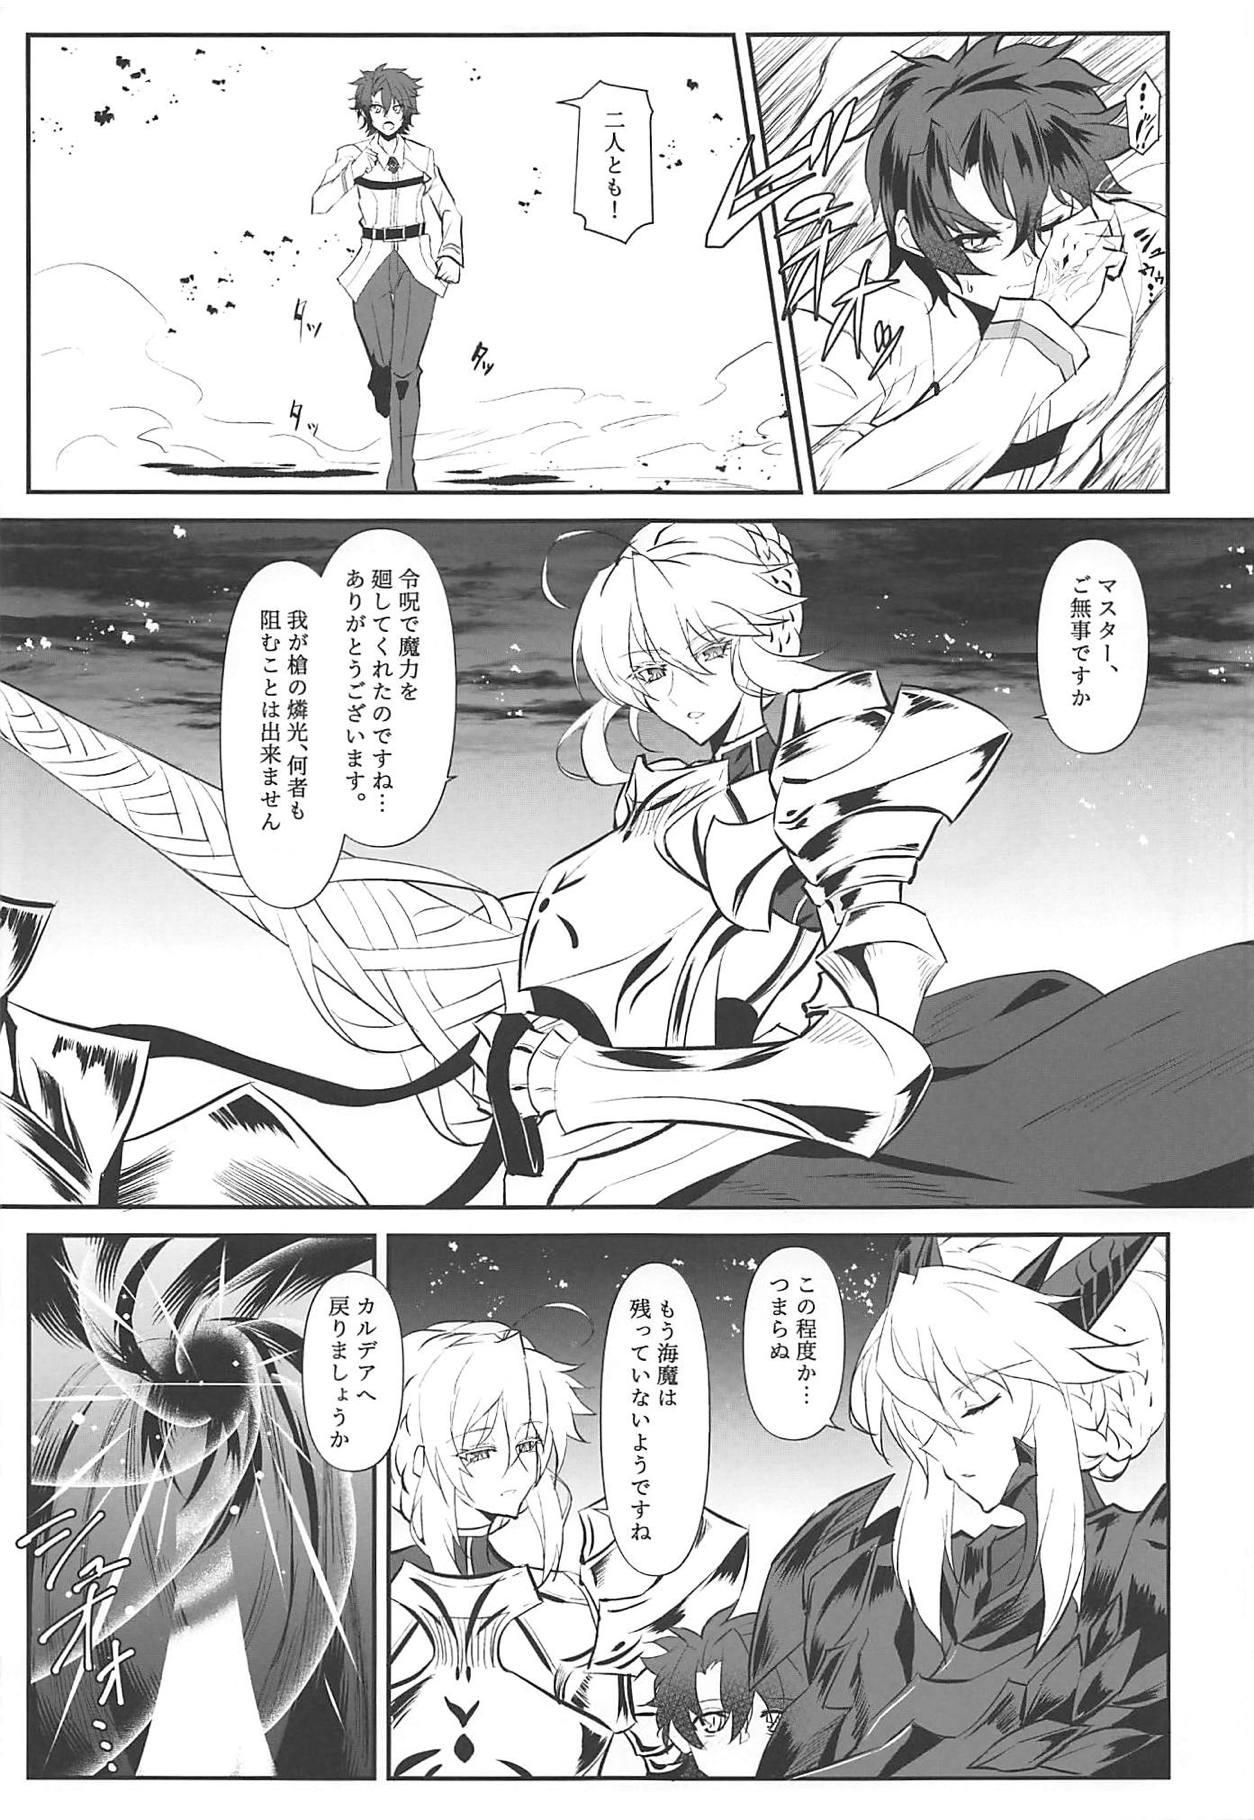 Fuck Altrias true LOVE - Fate grand order Pinoy - Page 4